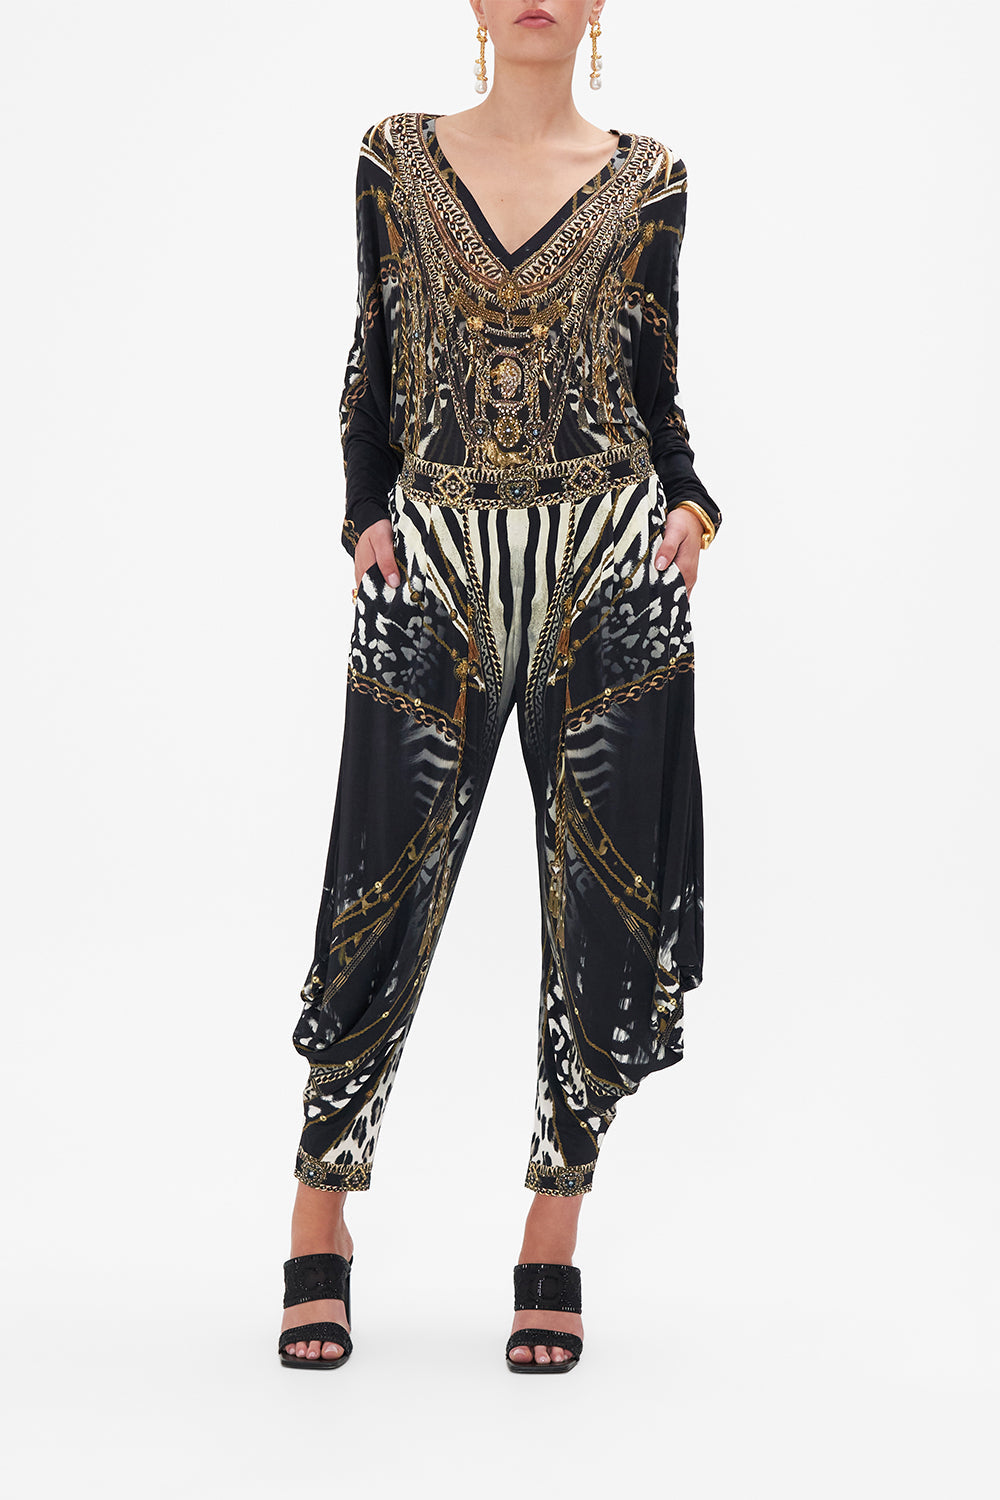 Front view of model wearing CAMILLA black and white animal print pants in Untamed Royalty print